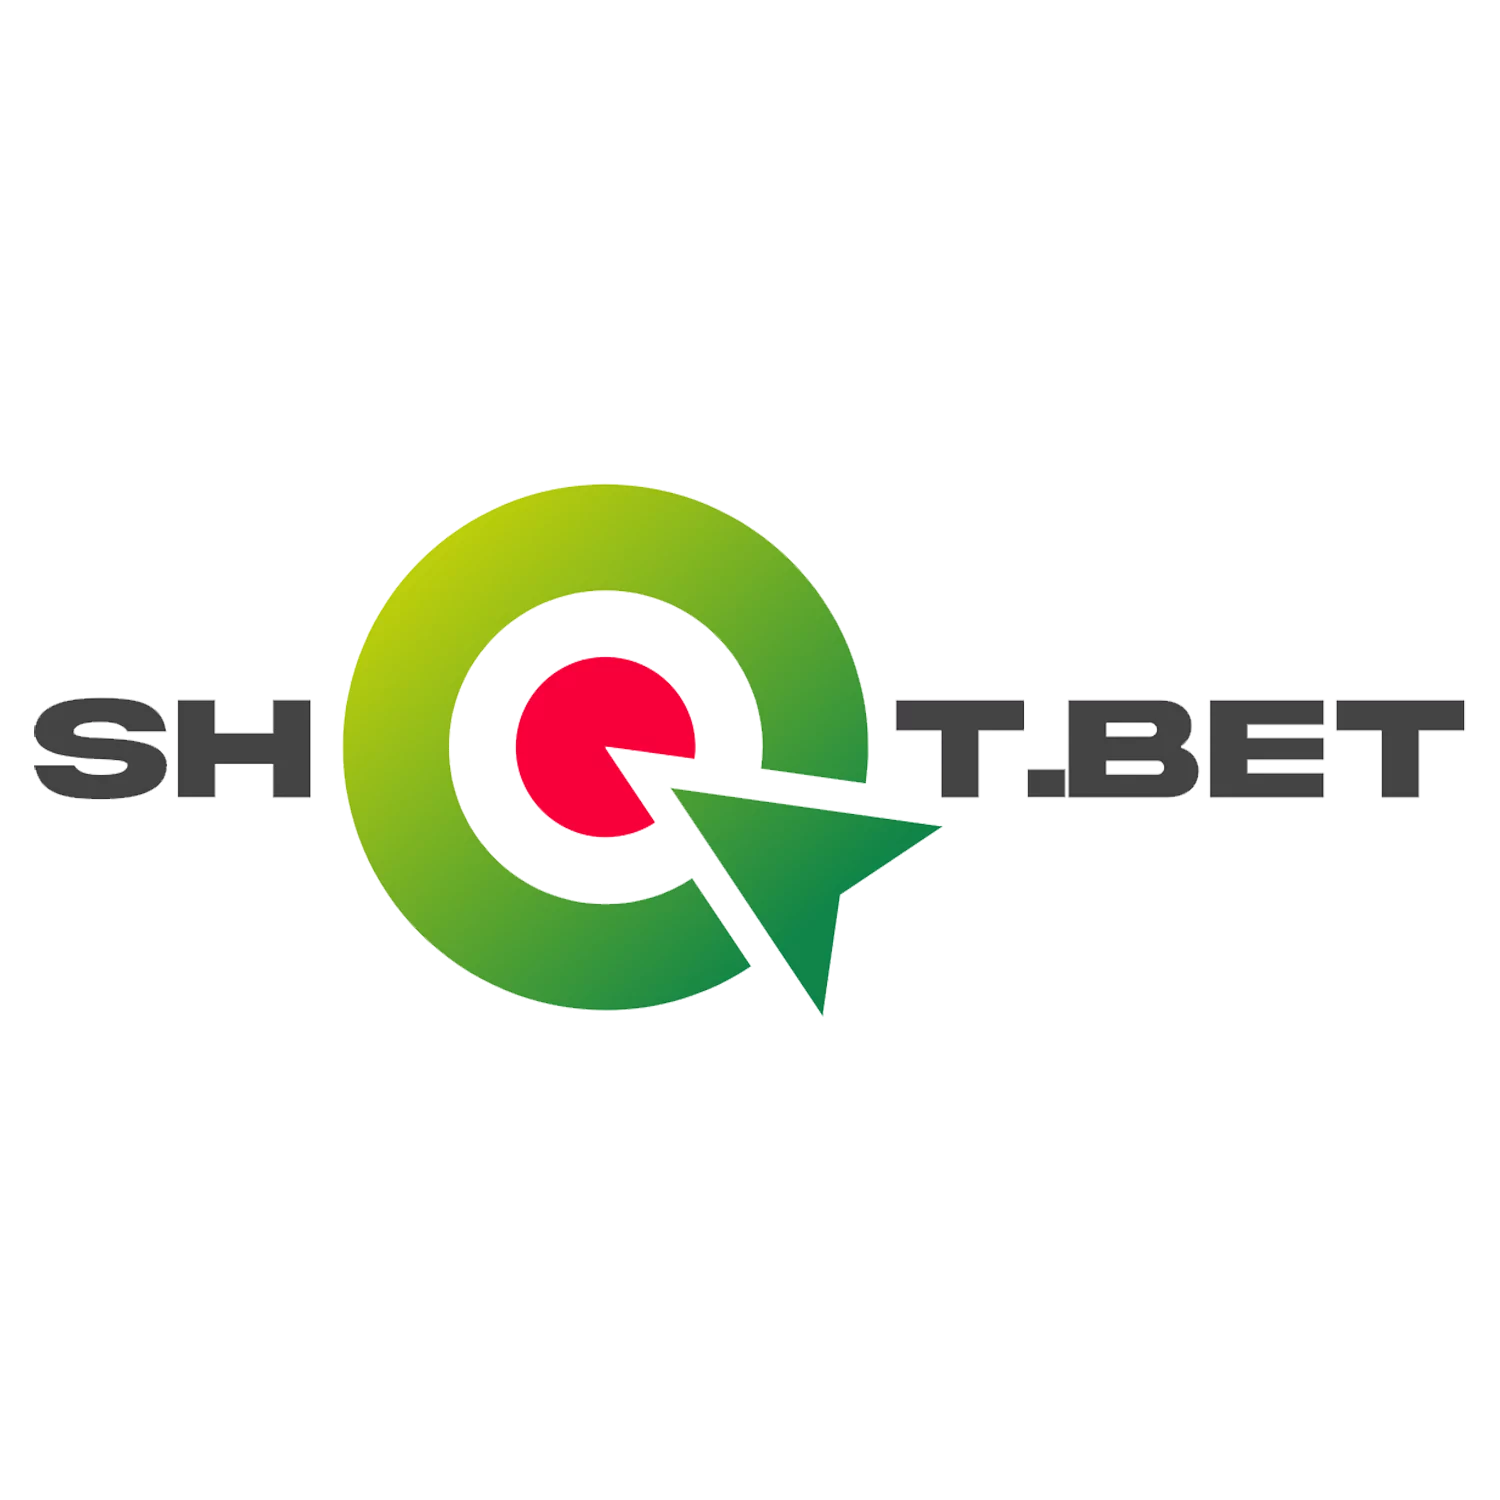 Read our review about betting and playing casinos on Shot.Bet.